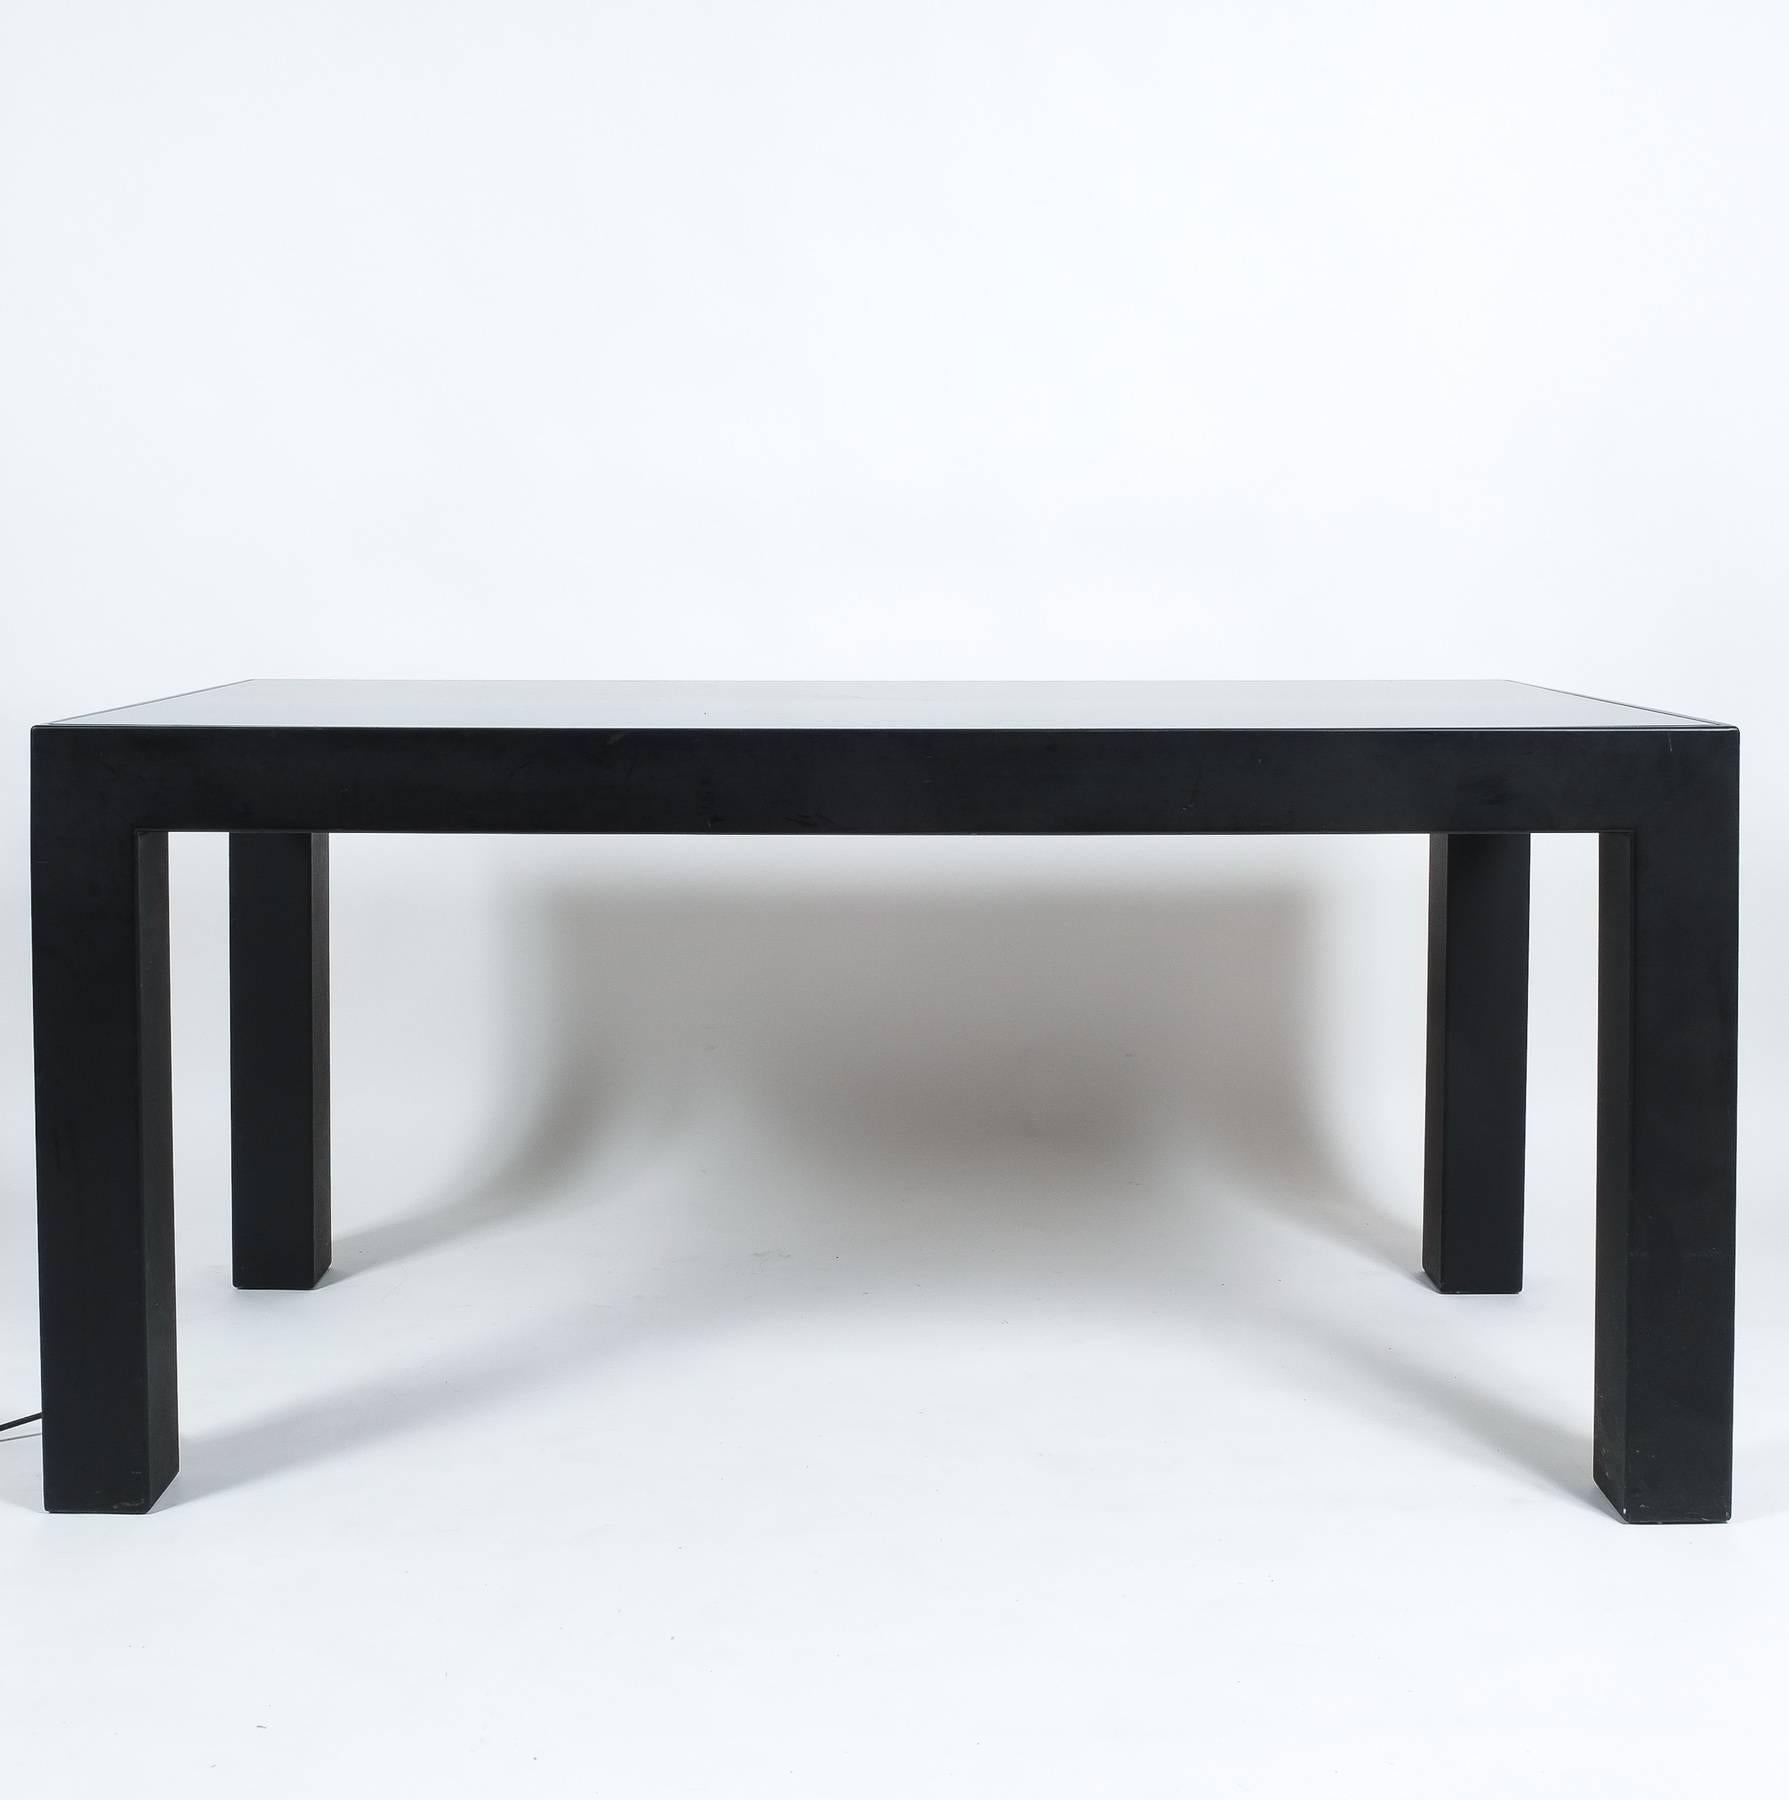 Very rare dining table (Wicked 64) by Johanna Grawunder for Post-Design Milan, 
2001. 

Dimensions are 31.1